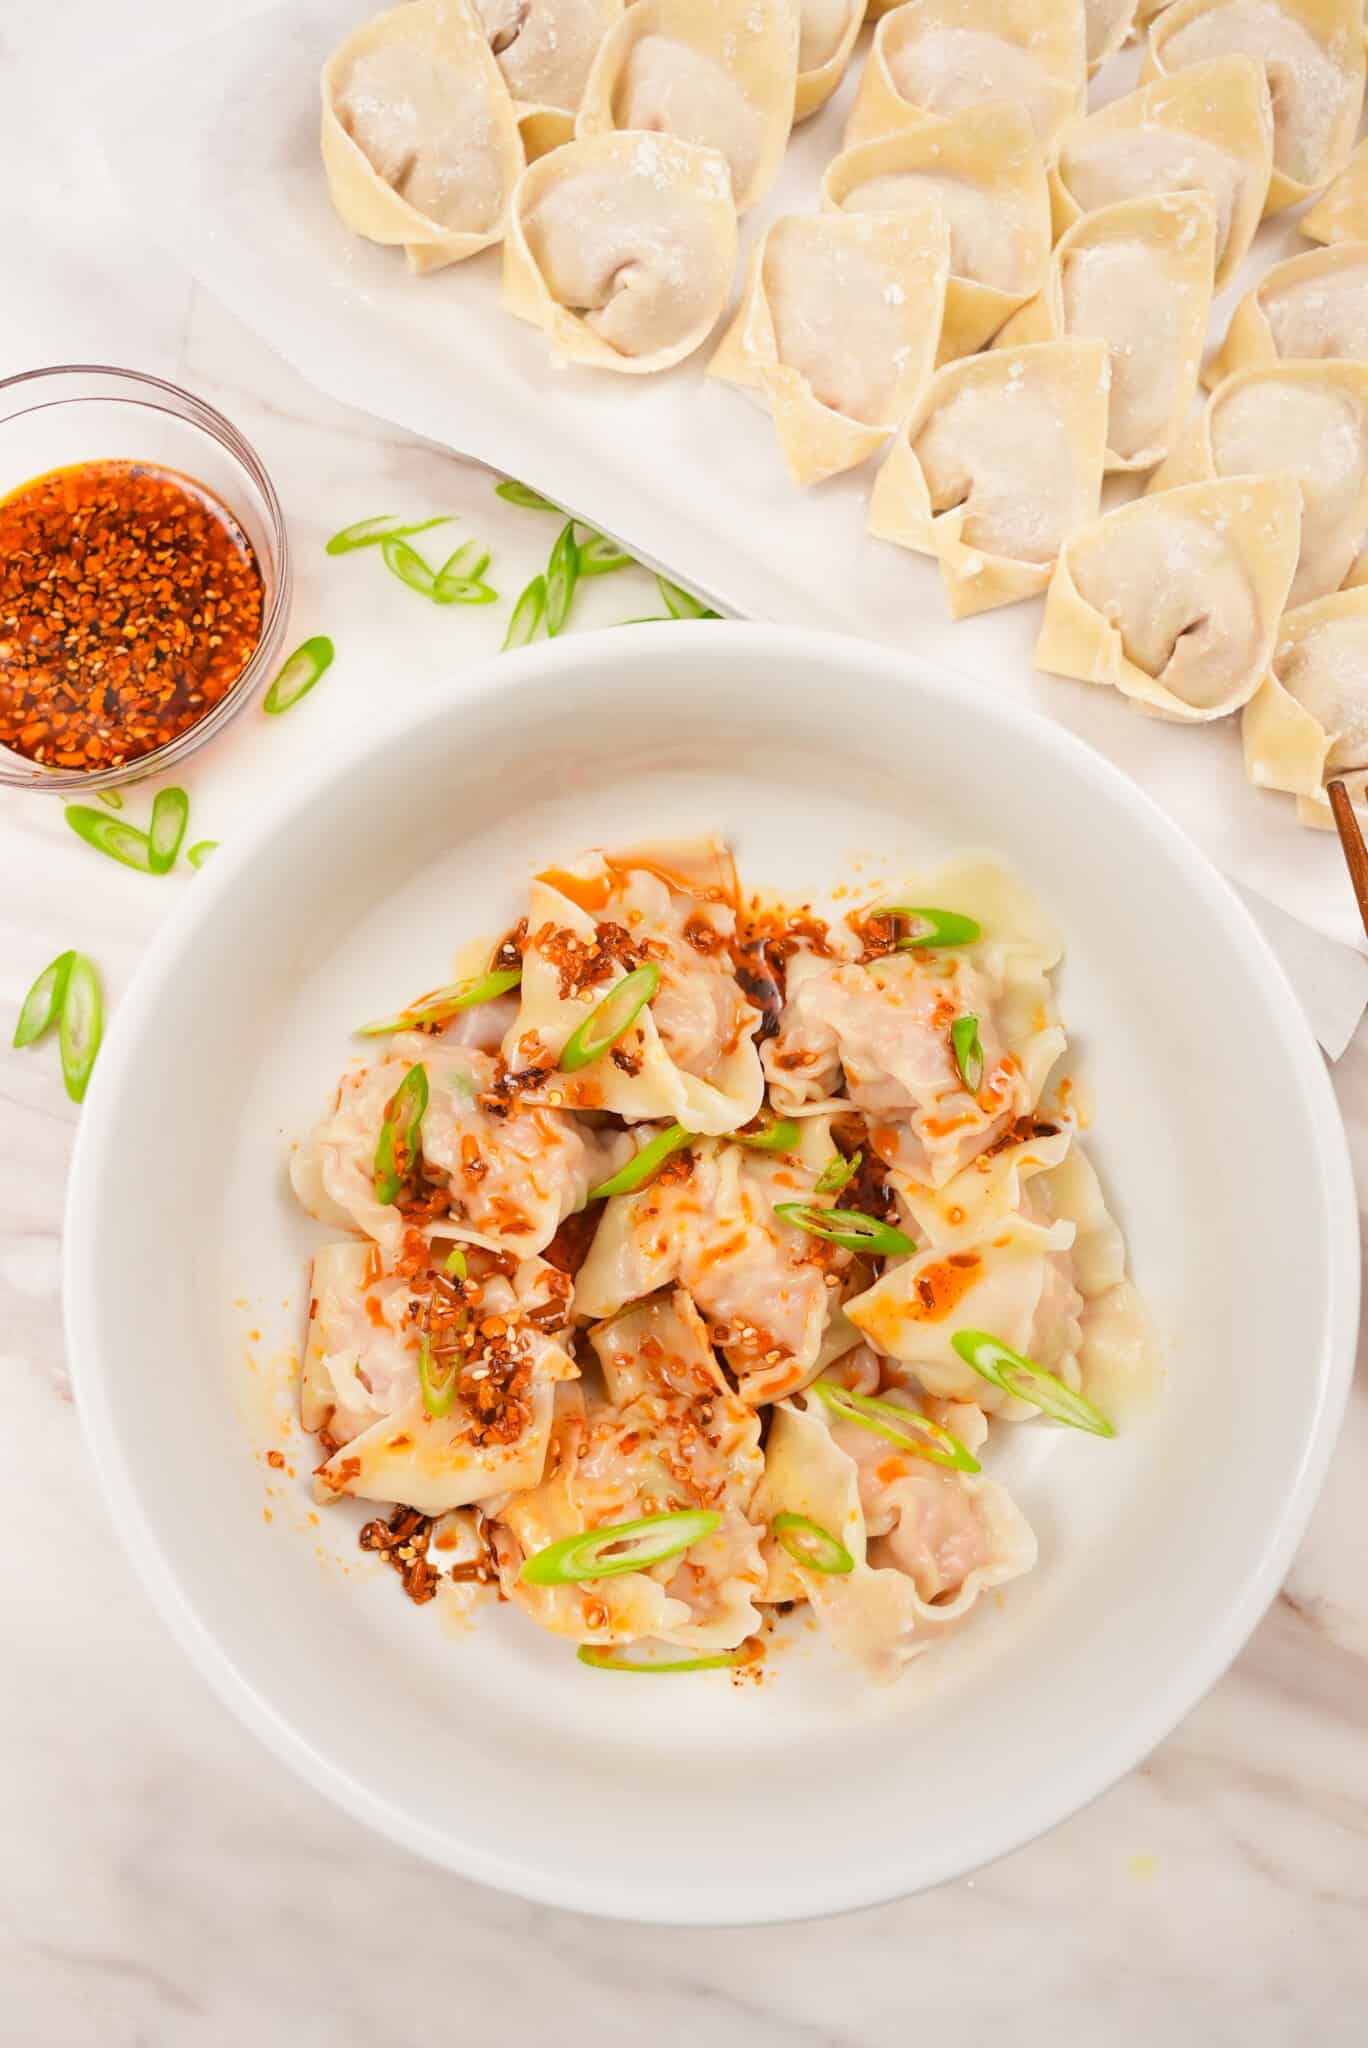 Cooking with Supi: Wonton Two Ways!